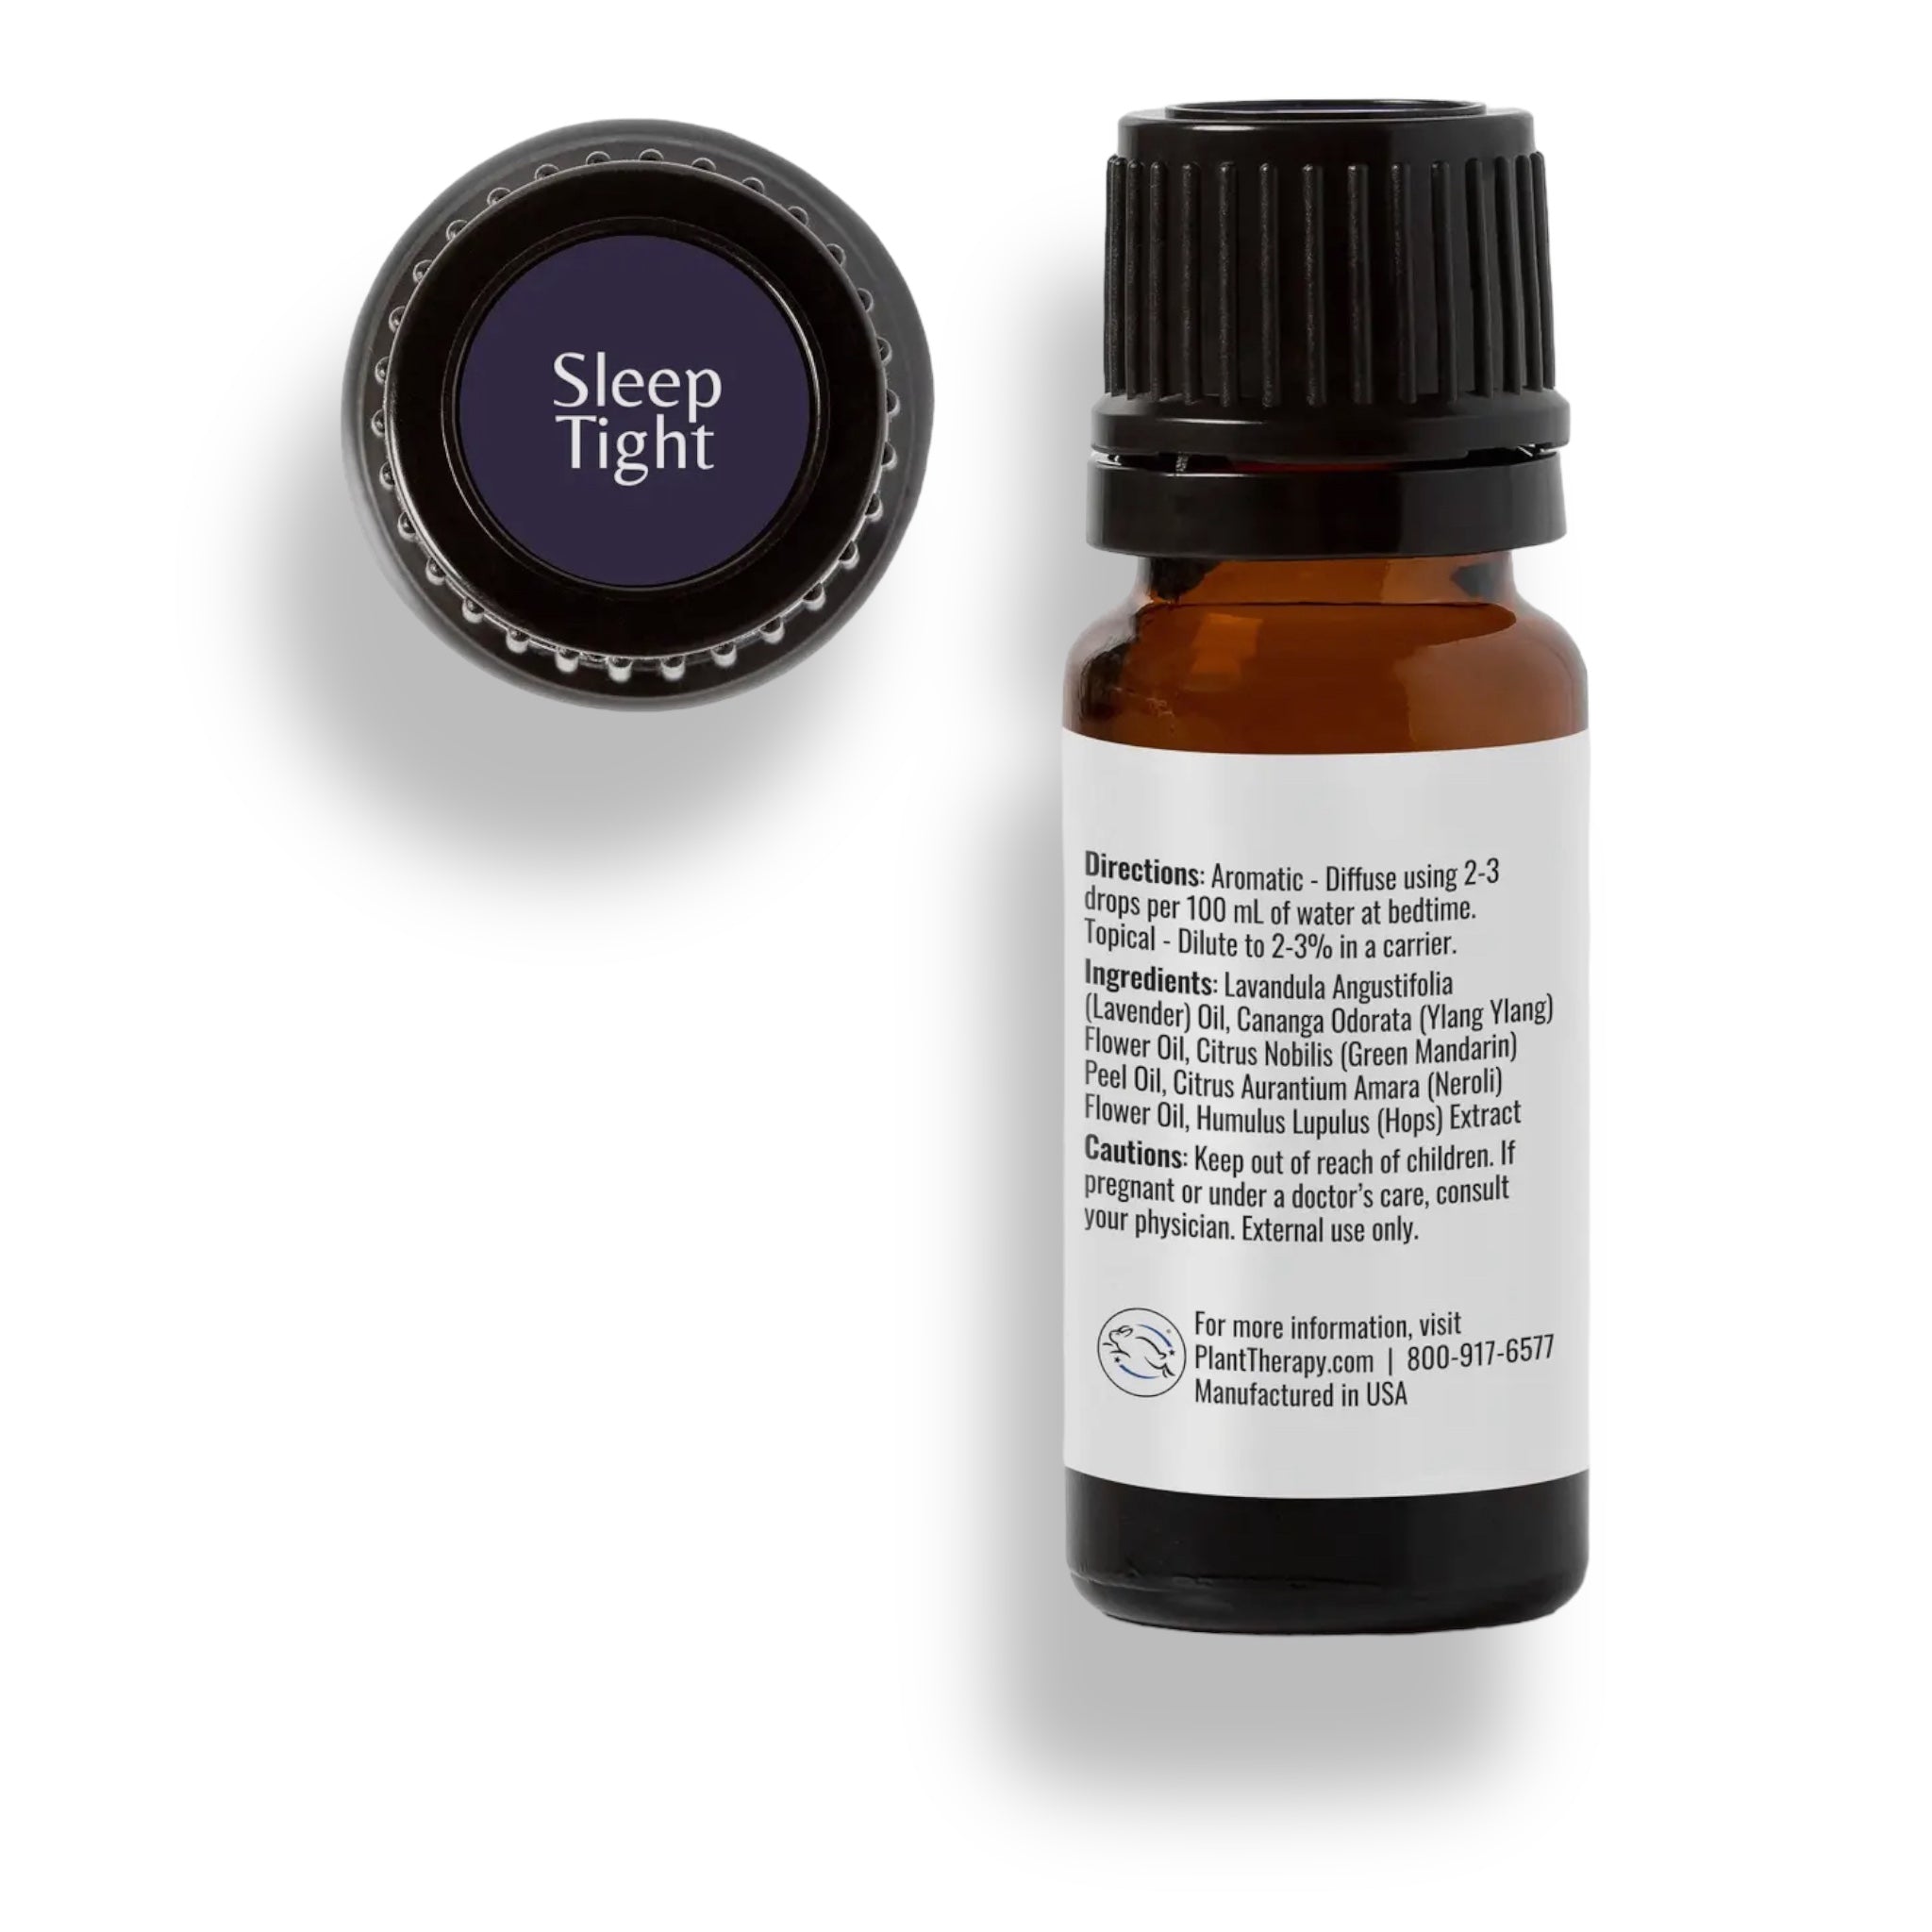 Aromatherapy Essential Oil Blend SLEEP TIGHT - Plant Therapy